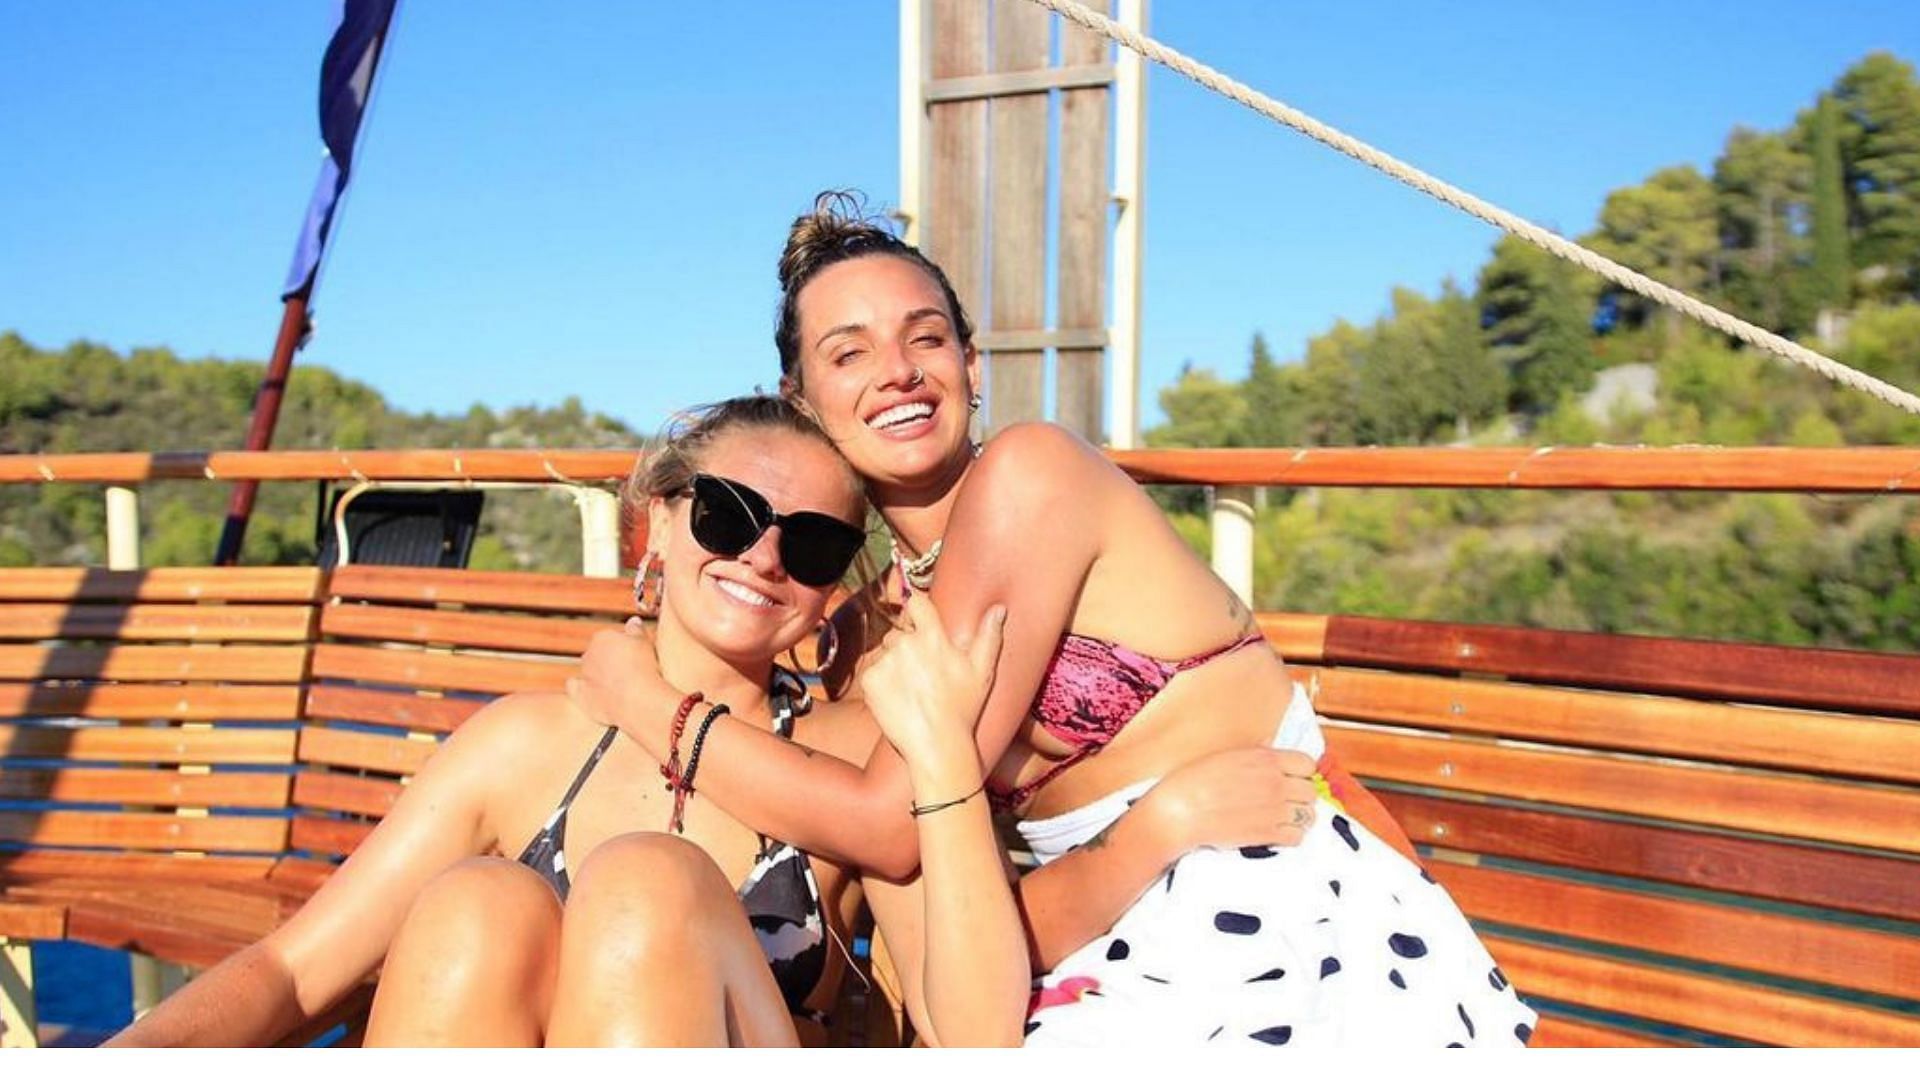 Daisy Kelliher and Alli Dore from Below Deck Sailing Yacht (Image via Instagram/daisykelliher87)